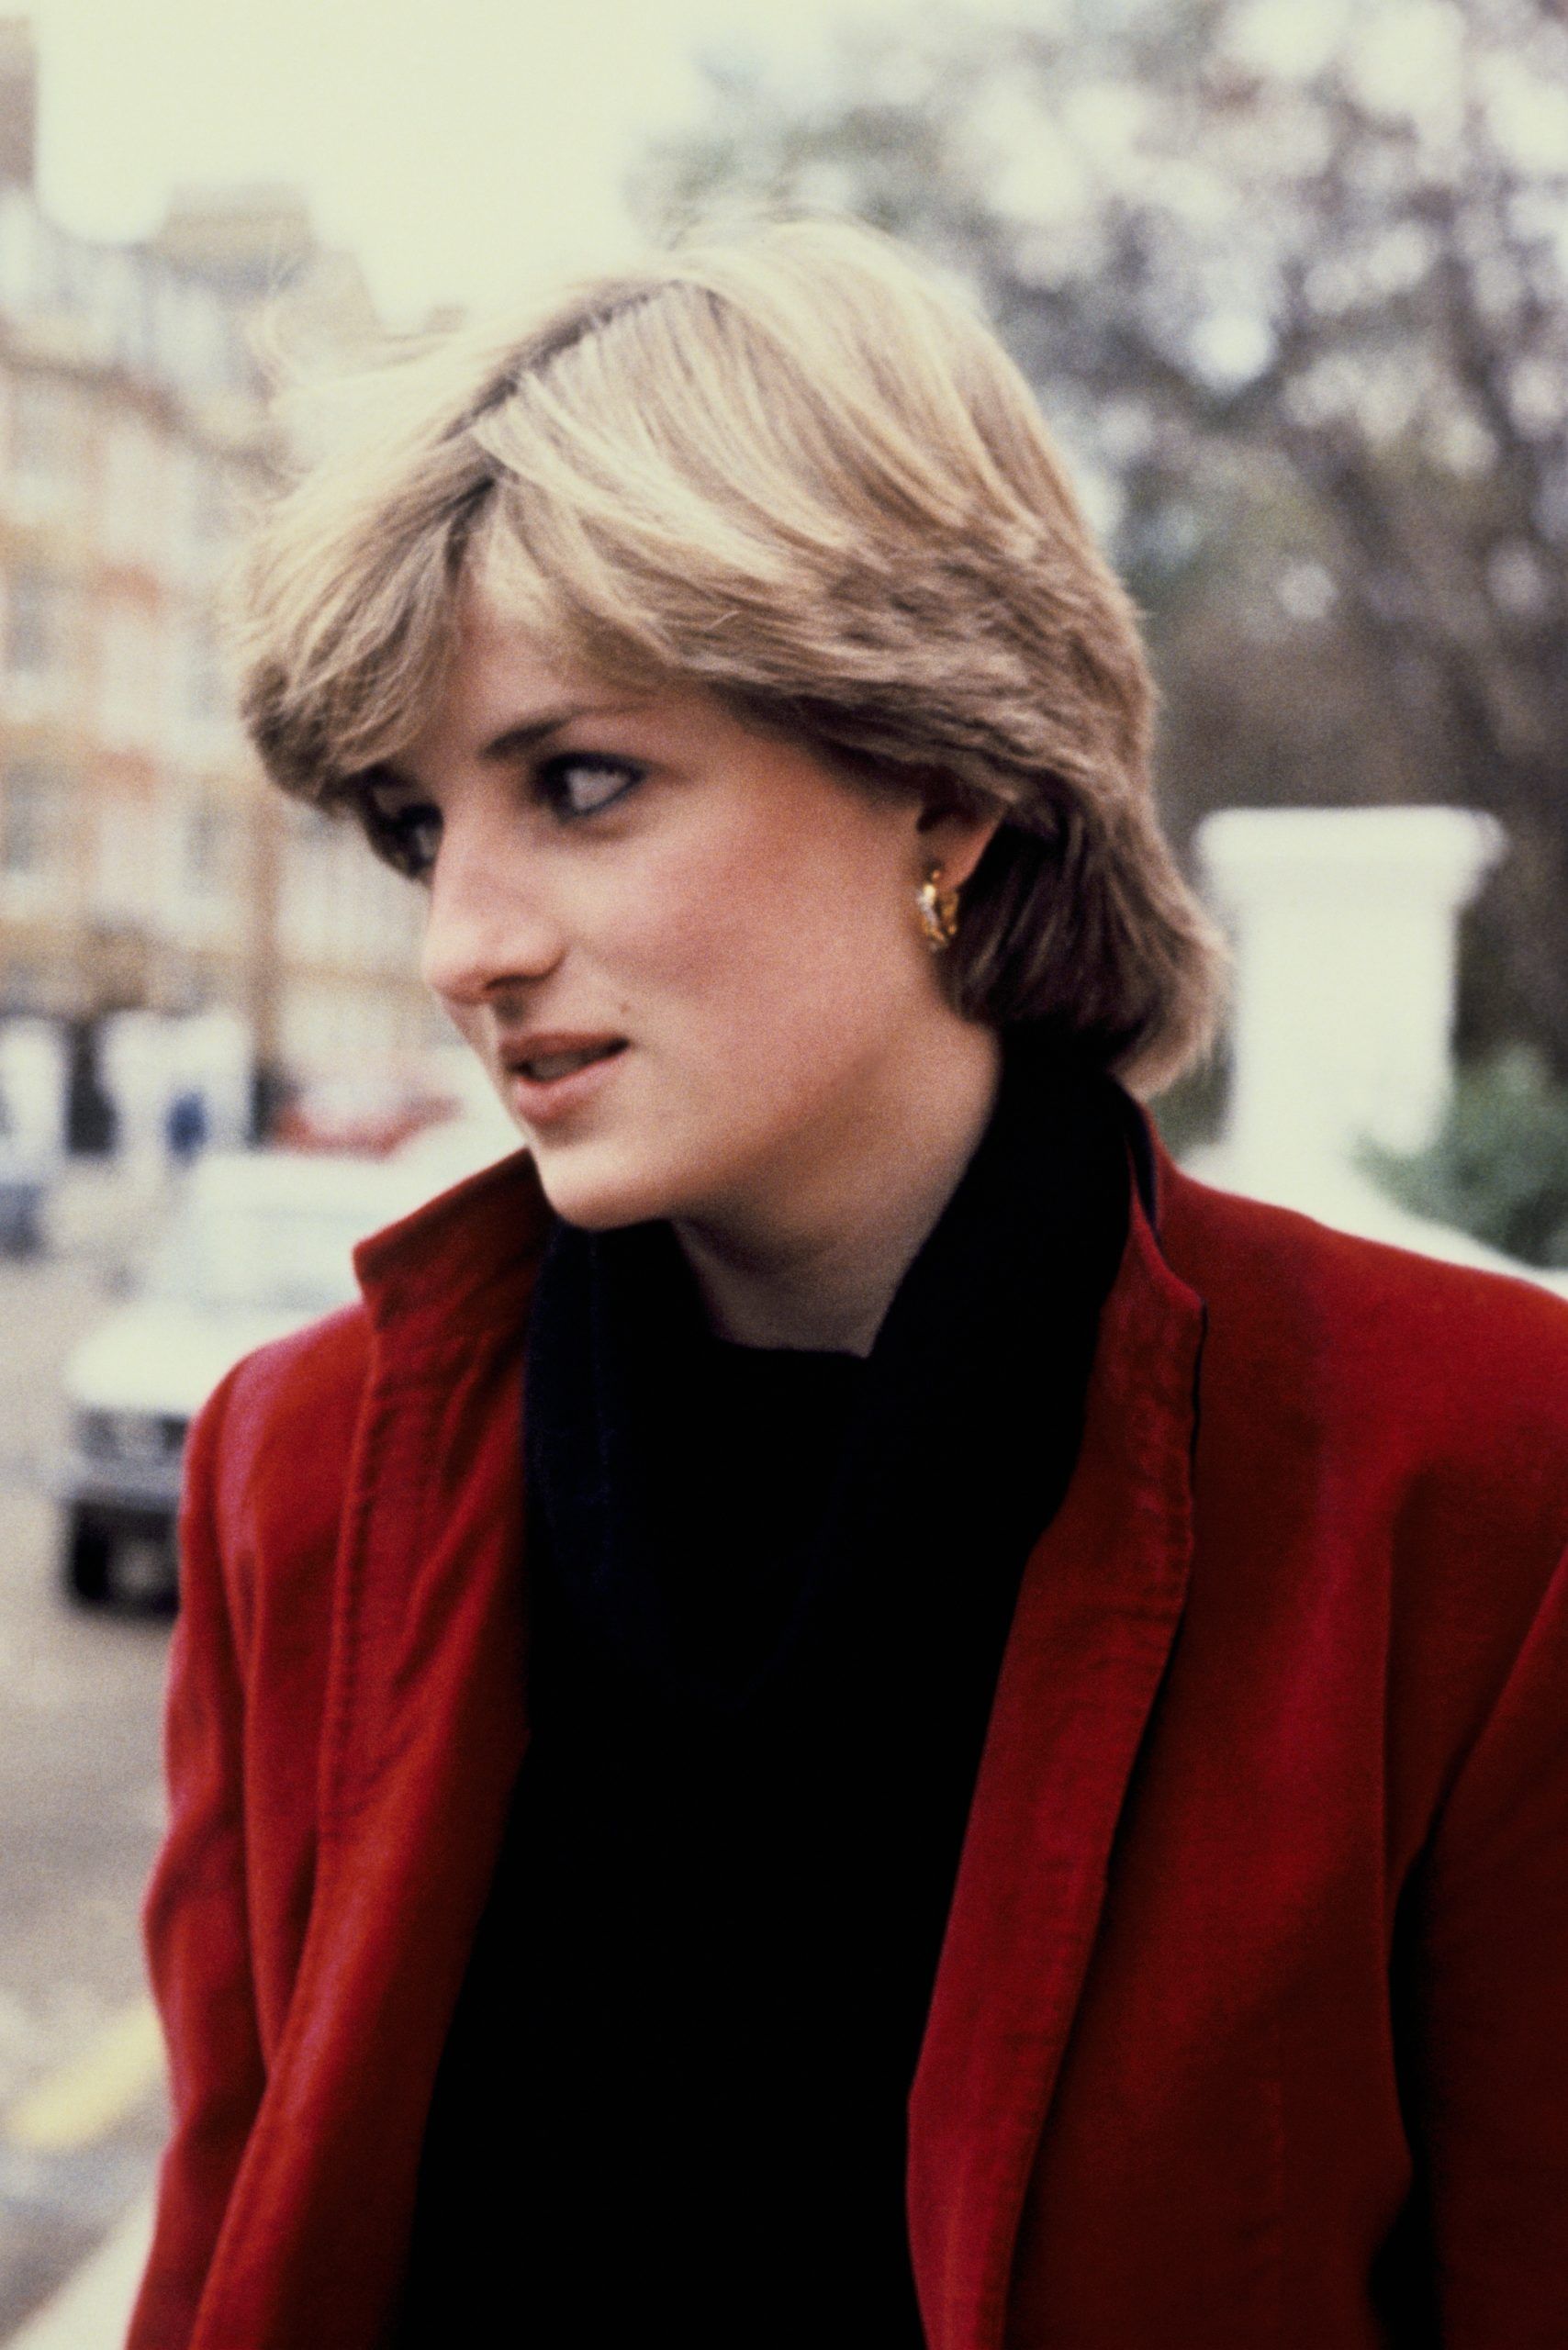 The Modern Princess Diana Bob Is Here Is It Best Left in the Past